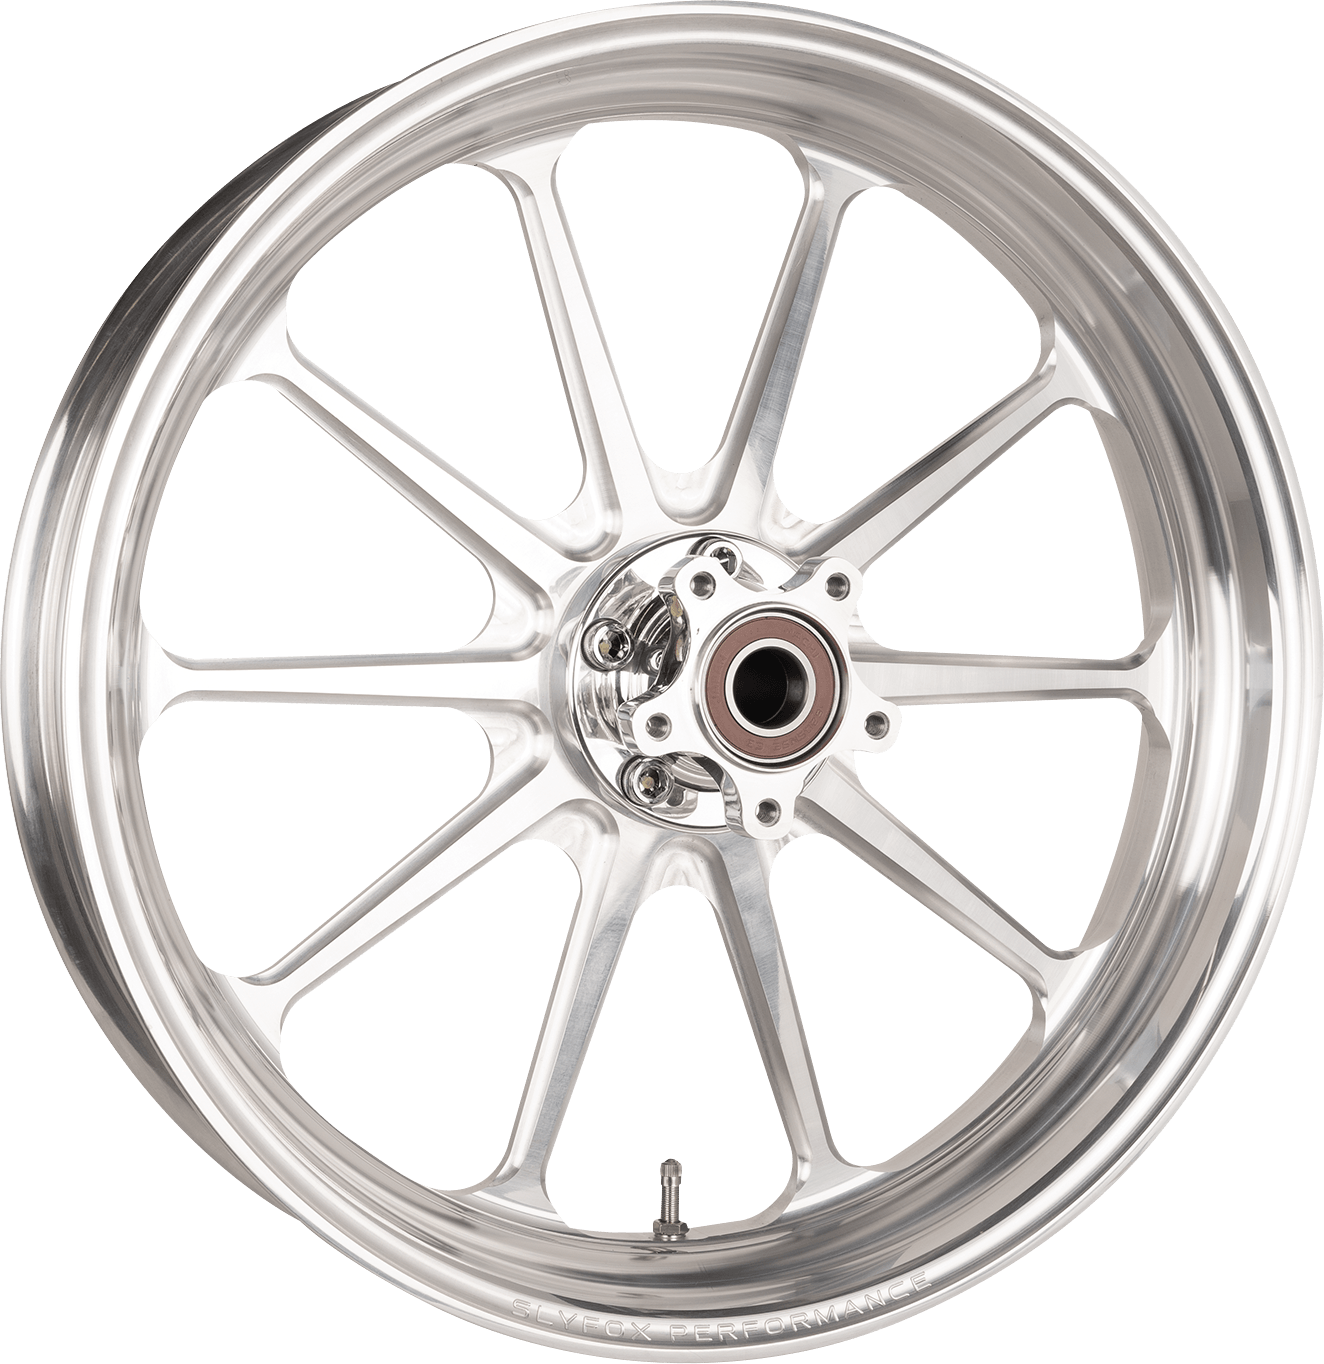 SLYFOX-21"x3.5" Front Track Pro Wheels / '08-Up Bagger-Wheels-MetalCore Harley Supply